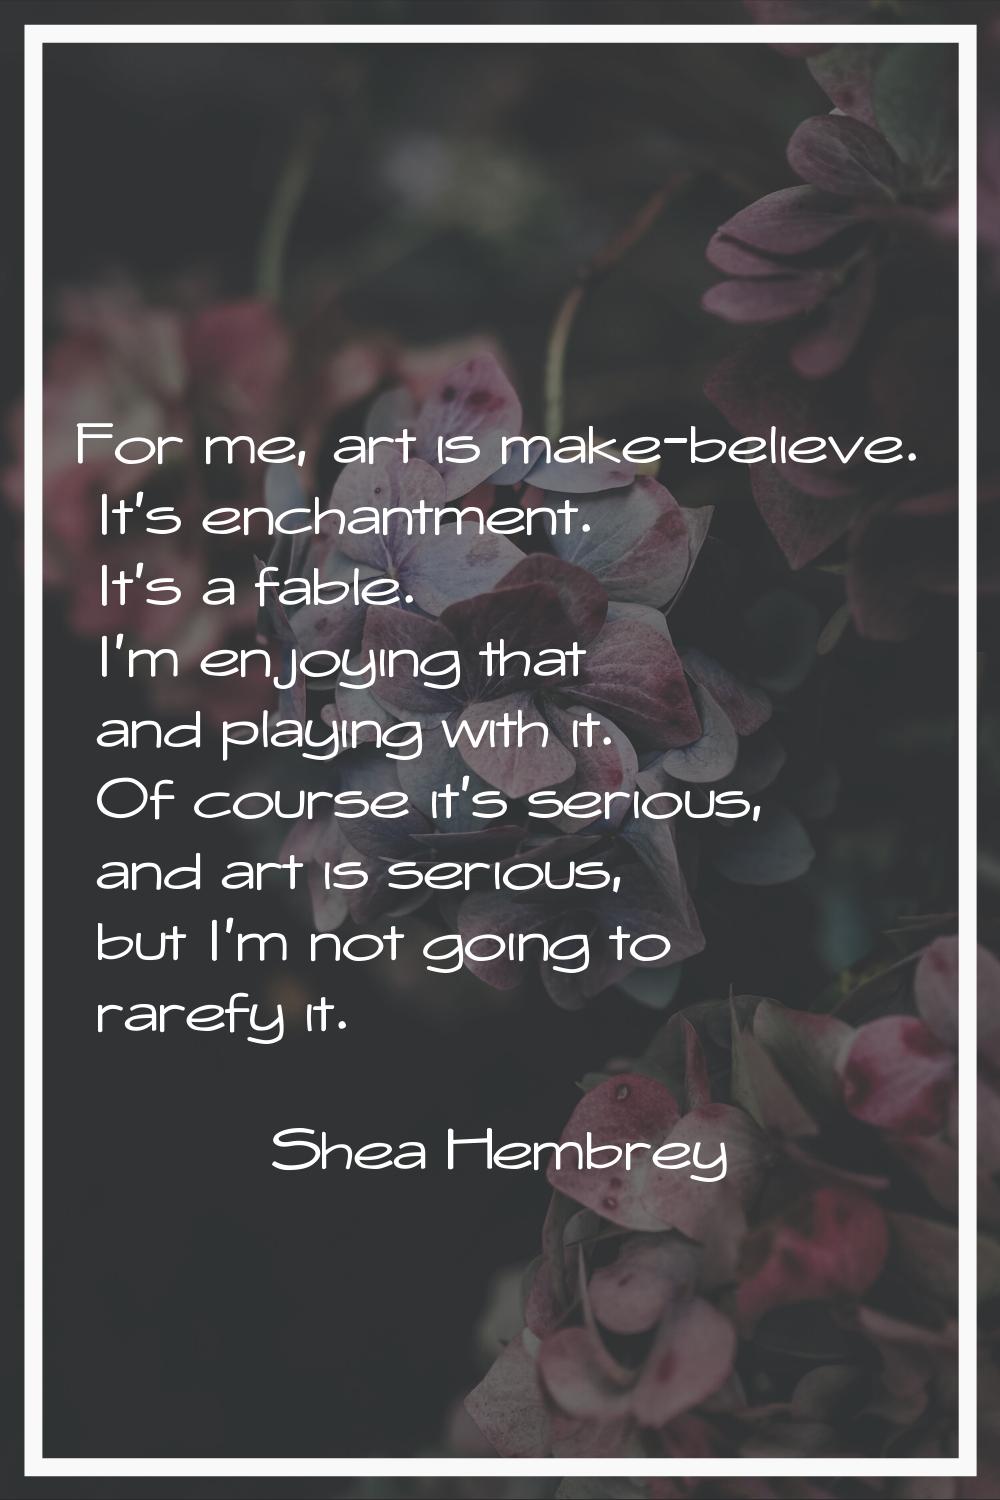 For me, art is make-believe. It's enchantment. It's a fable. I'm enjoying that and playing with it.